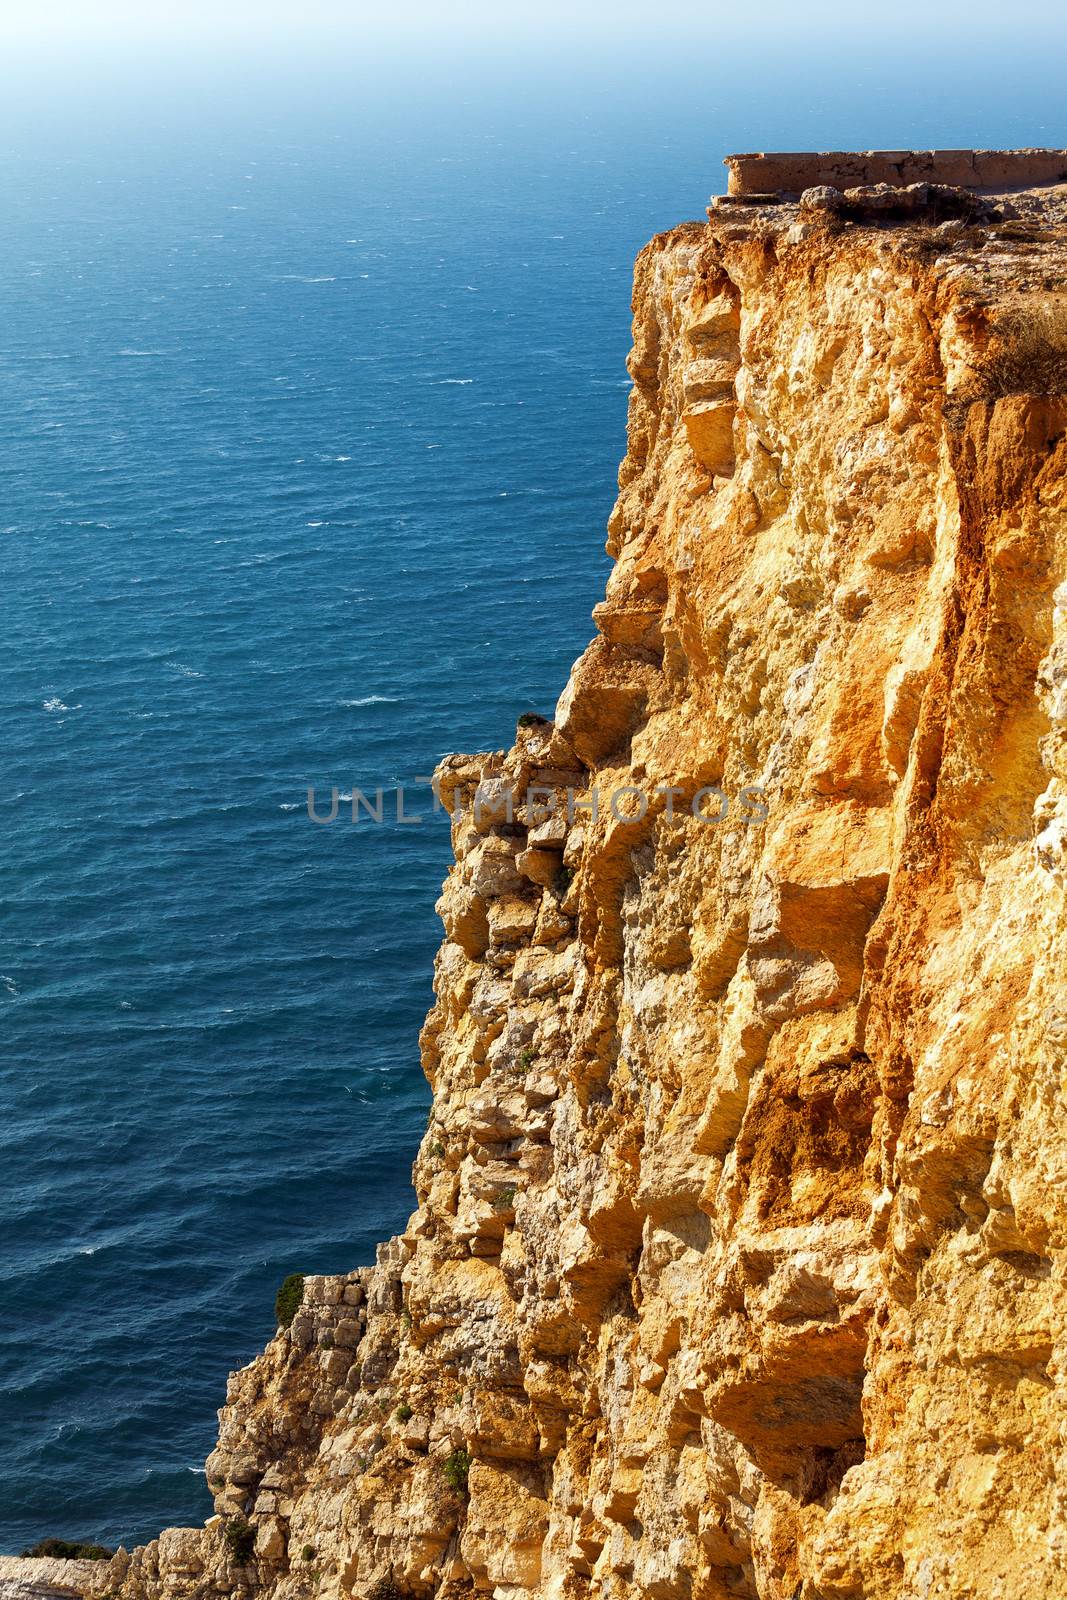 View of a rugged coastline with steep barren cliffs falling down to a rocky shoreline with waves